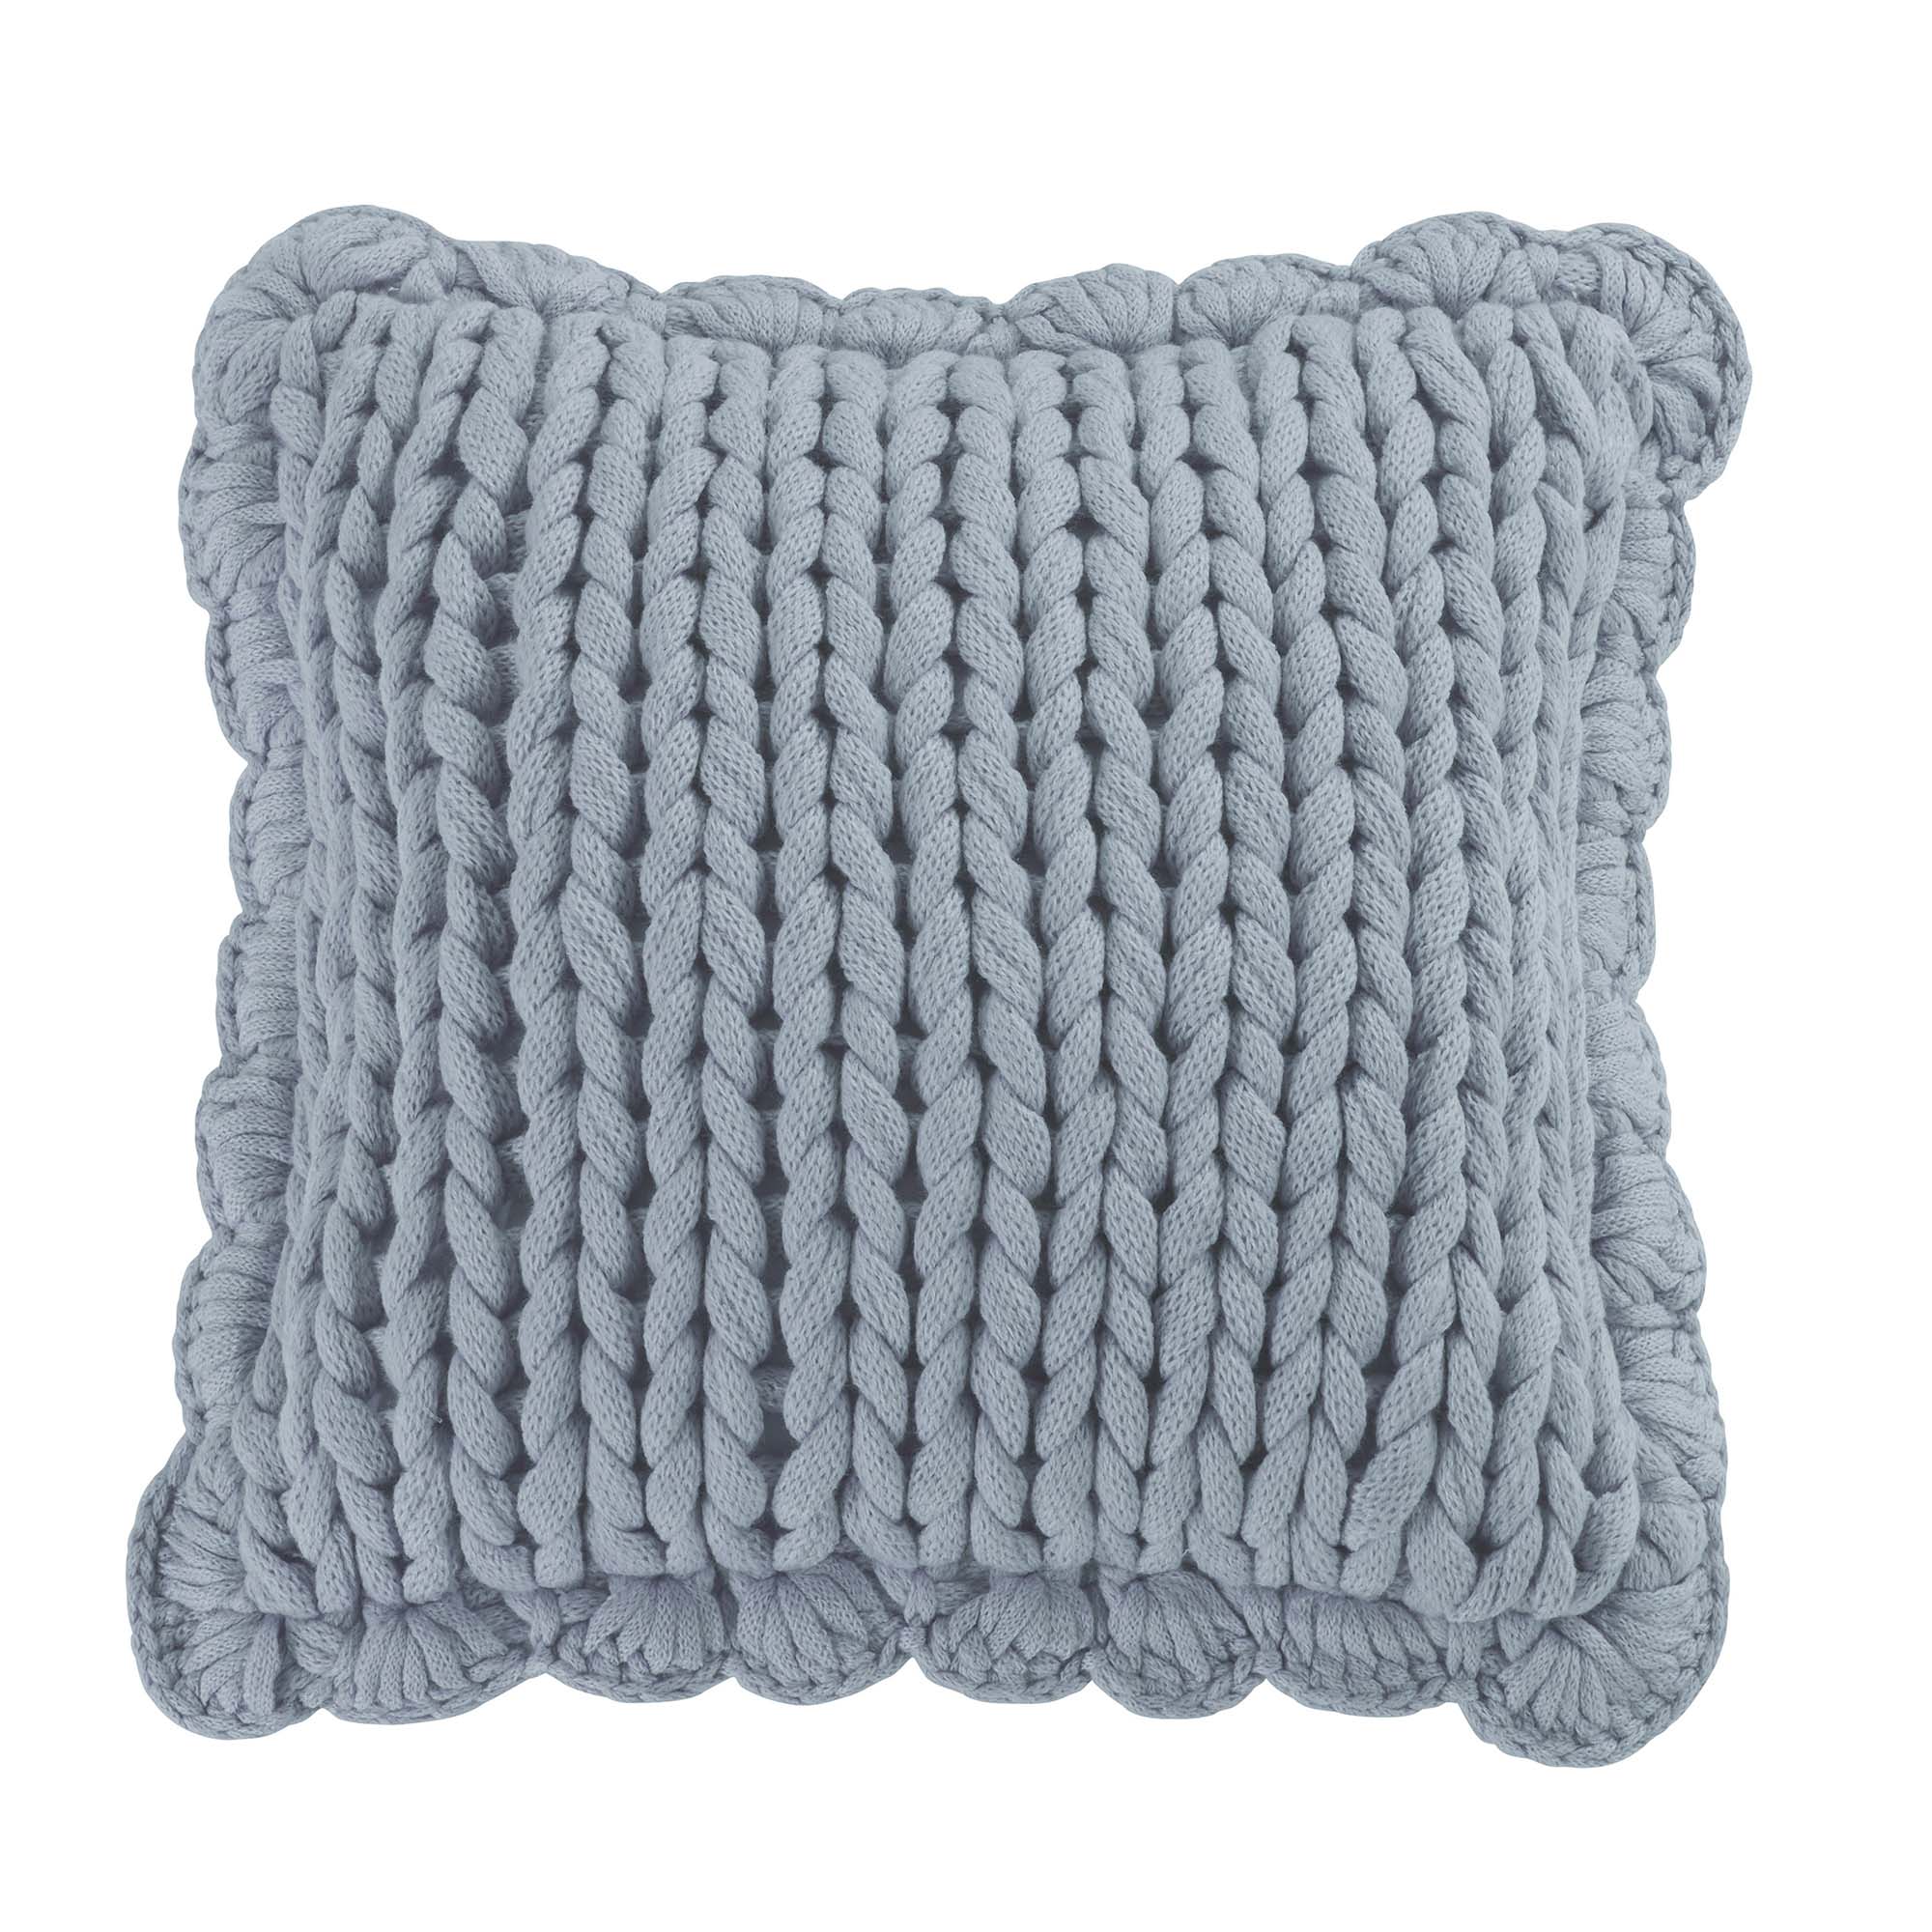 Chunky Knitted Blue Decorative Pillow Throw Pillows By Donna Sharp